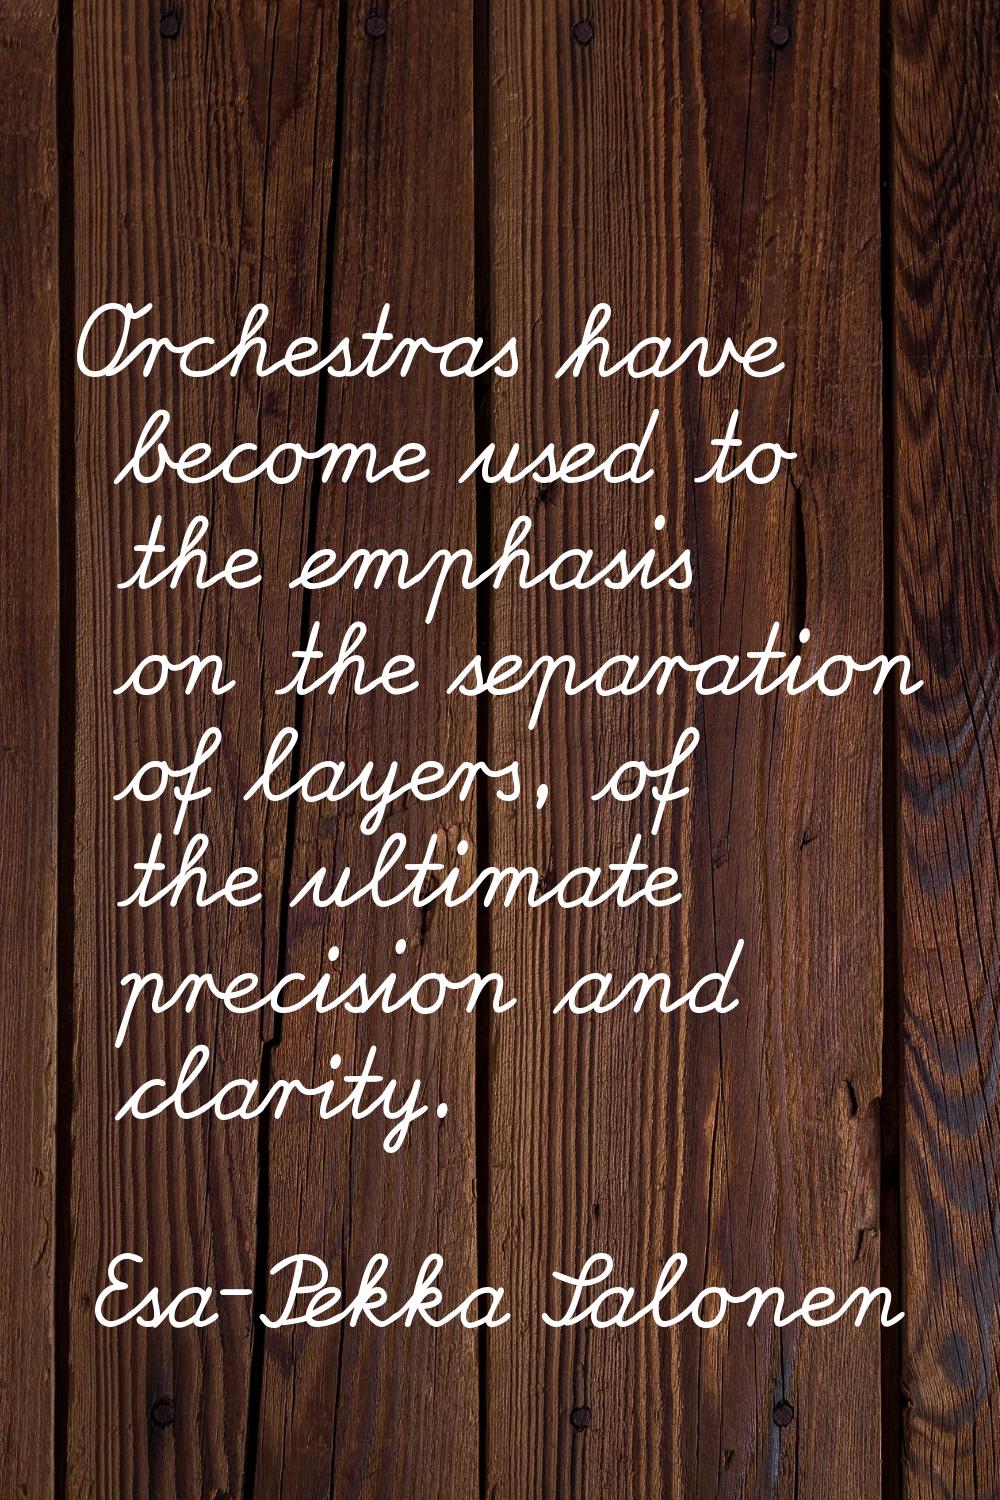 Orchestras have become used to the emphasis on the separation of layers, of the ultimate precision 